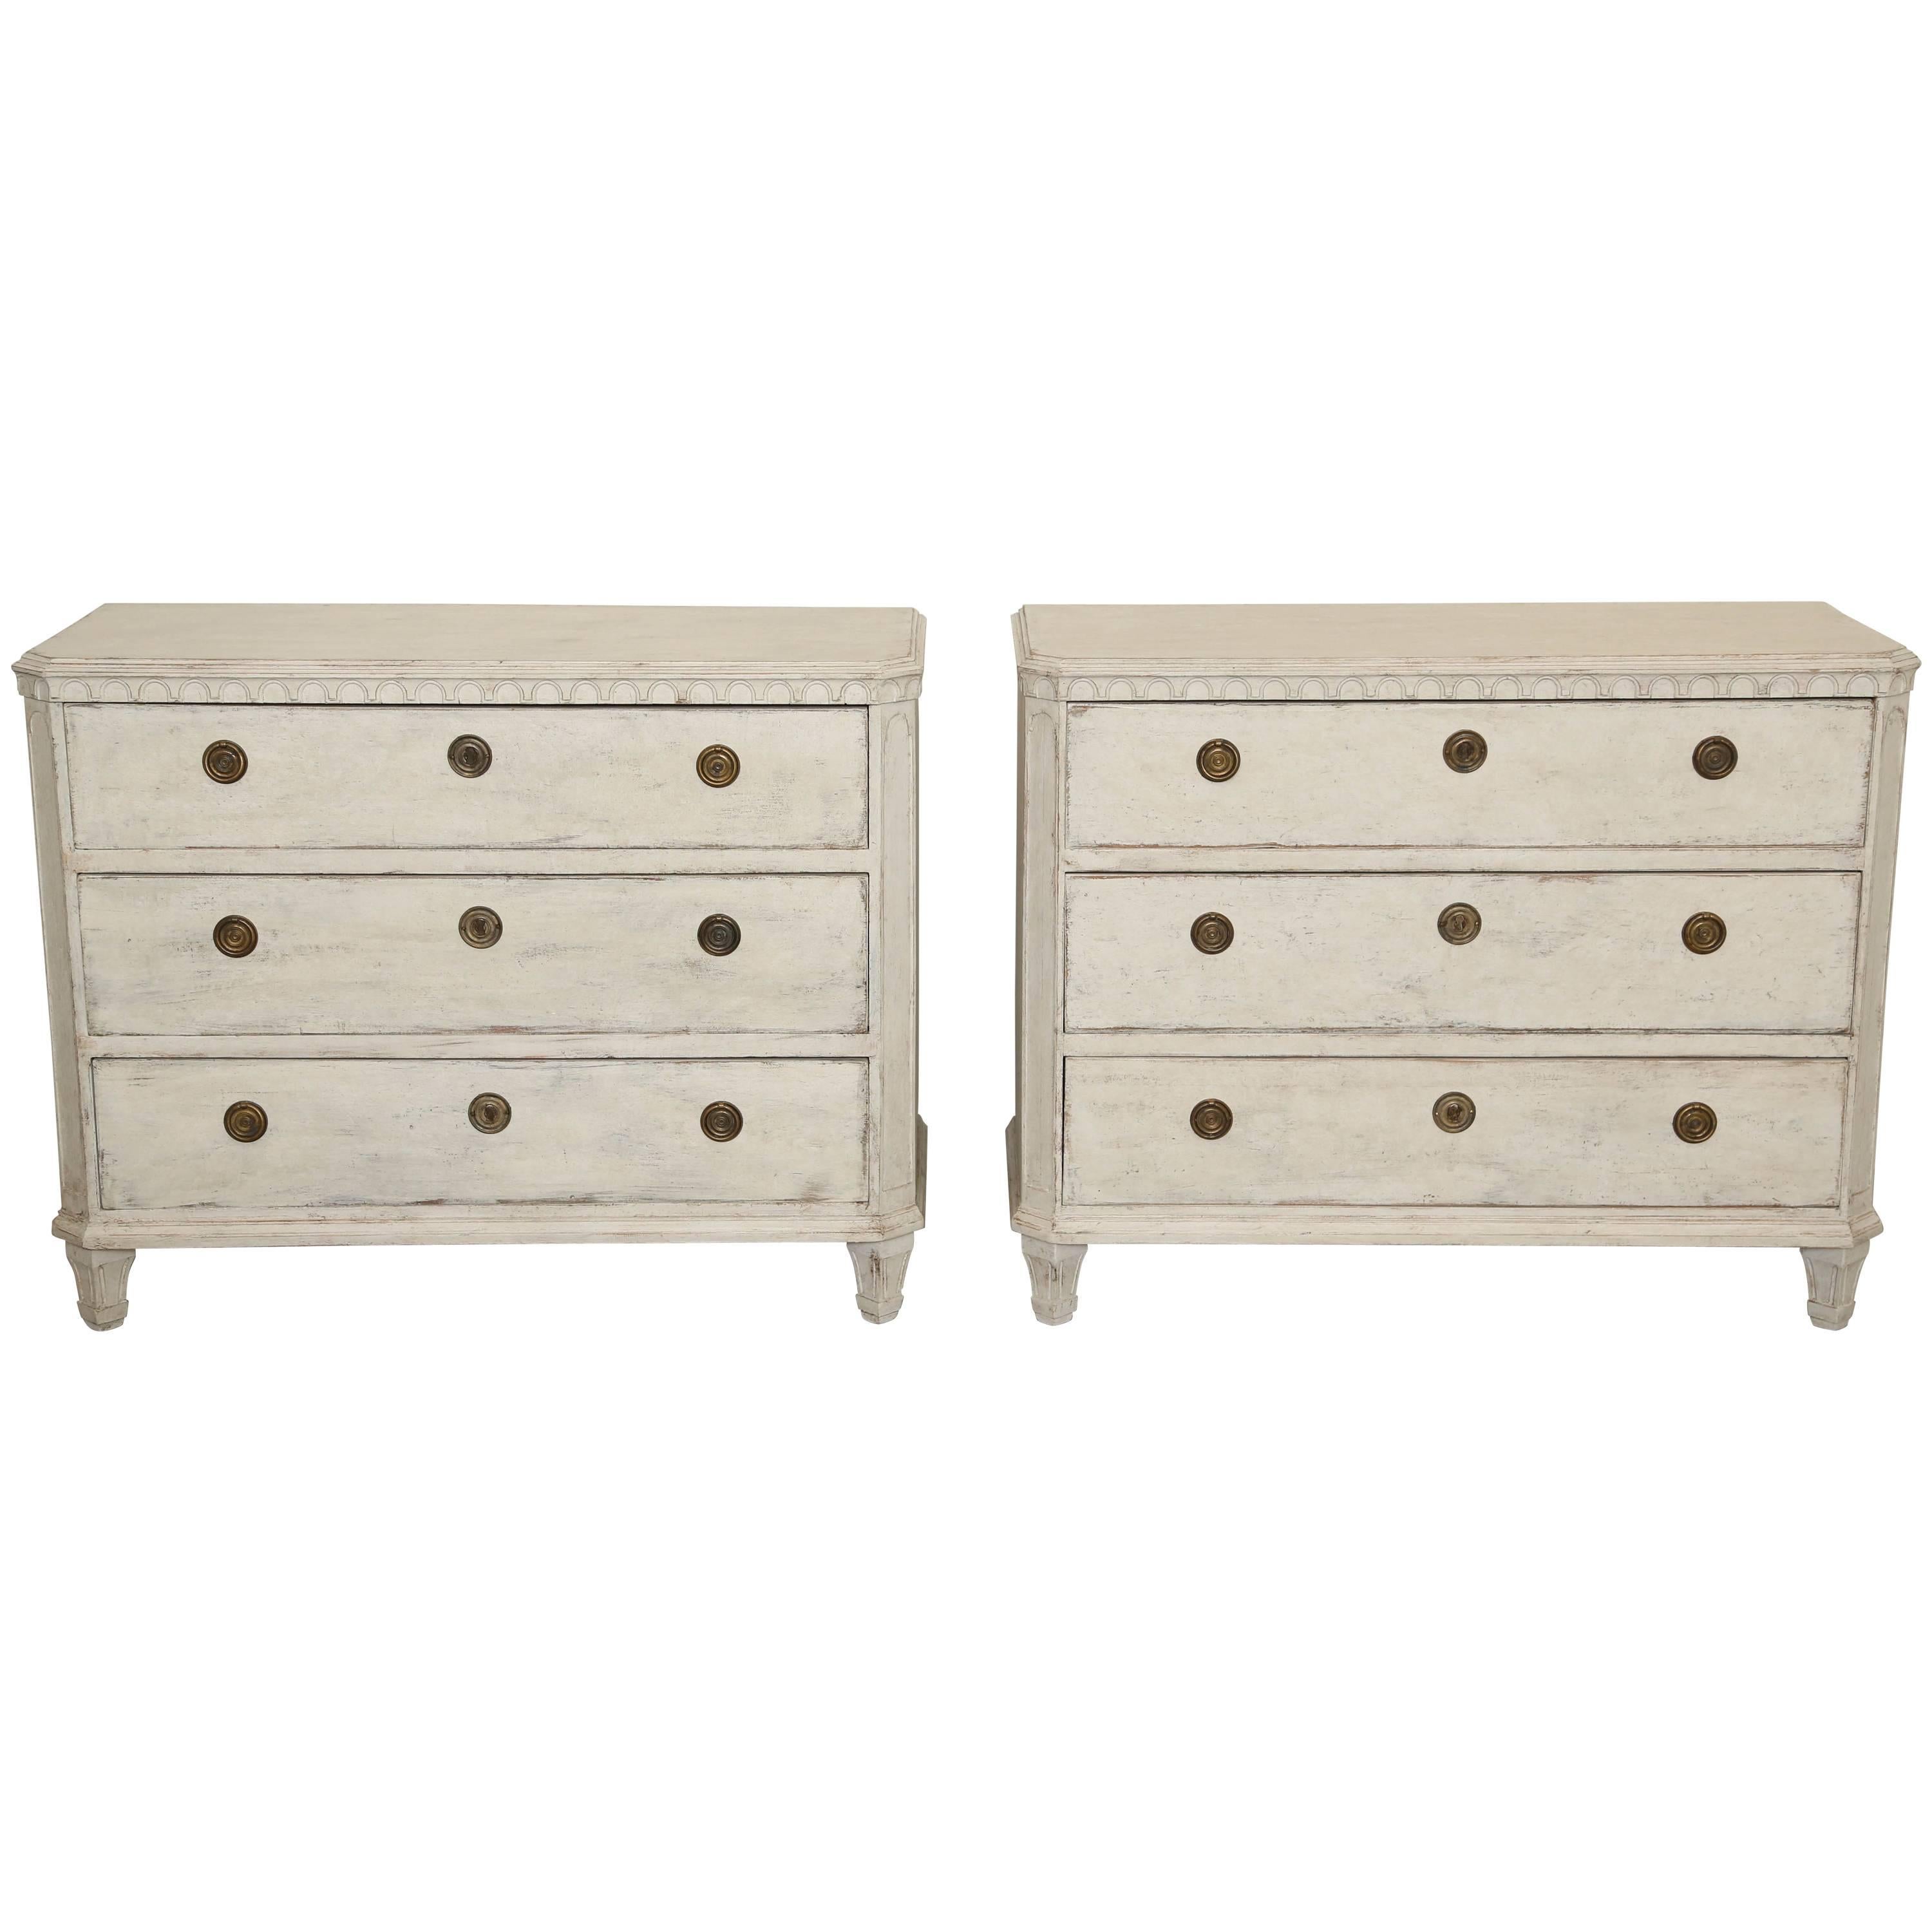 Pair of Antique Swedish Gustavian Style Painted Chests, Late 19th Century